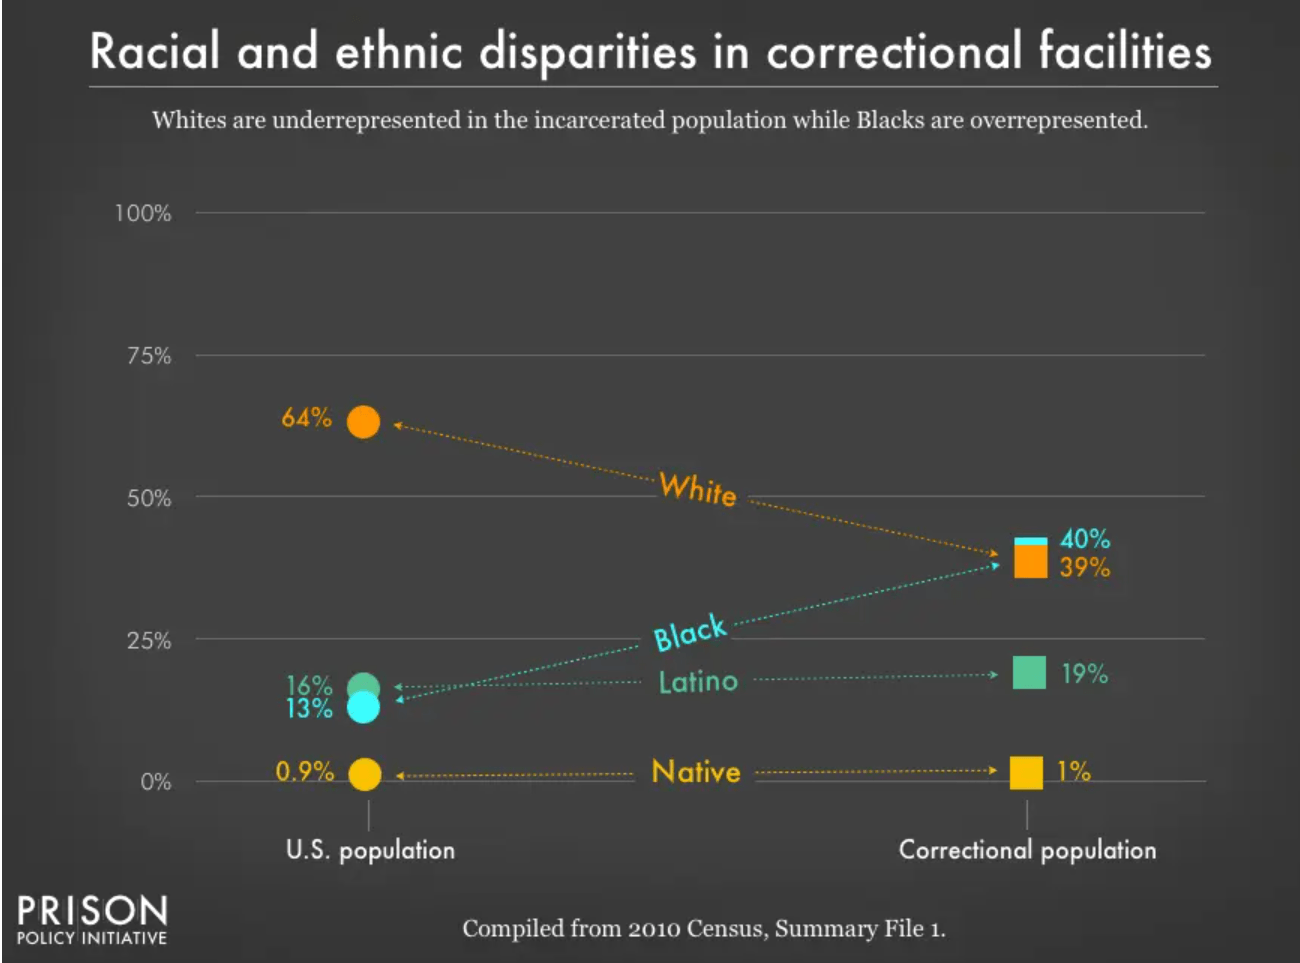 A line graph titled "Racial and ethnic disparities in prisons and jails" shows that white people are underreppresented in the incarceration population while Black people are overrappresented when one considers each group's percentage of the U.S. population and the percentage of that race in the U.S.'s prisons and jails. White people make up 64% of the U.S.'s population but 39% of prison populations, while Black people make up 13% of the U.S.'s population and 40% of the U.S.'s prison/jail population. 